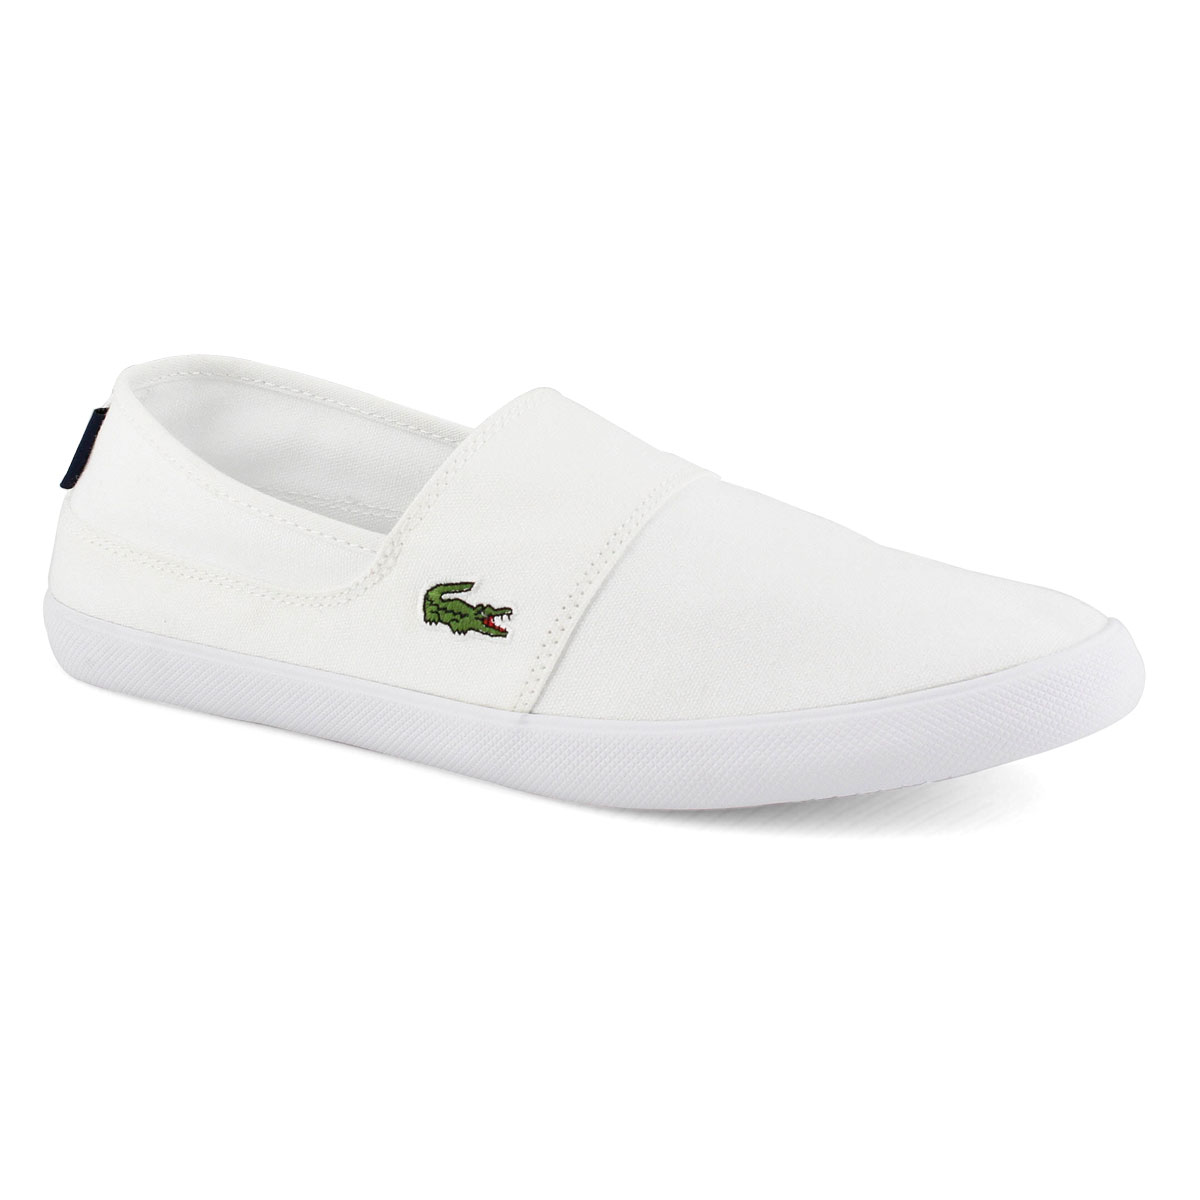 lacoste slippers canada